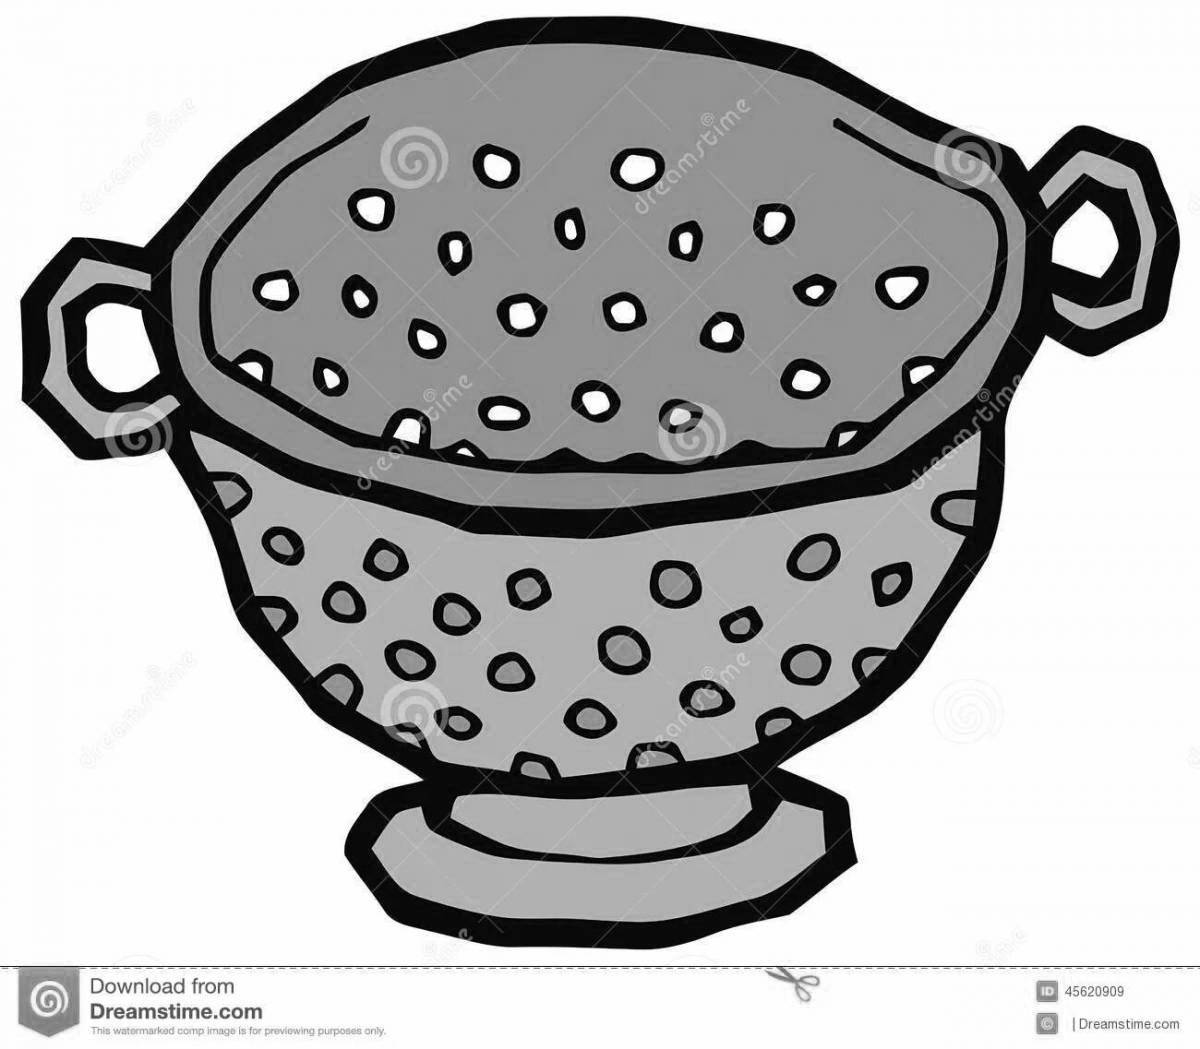 Sieve inspirational coloring page